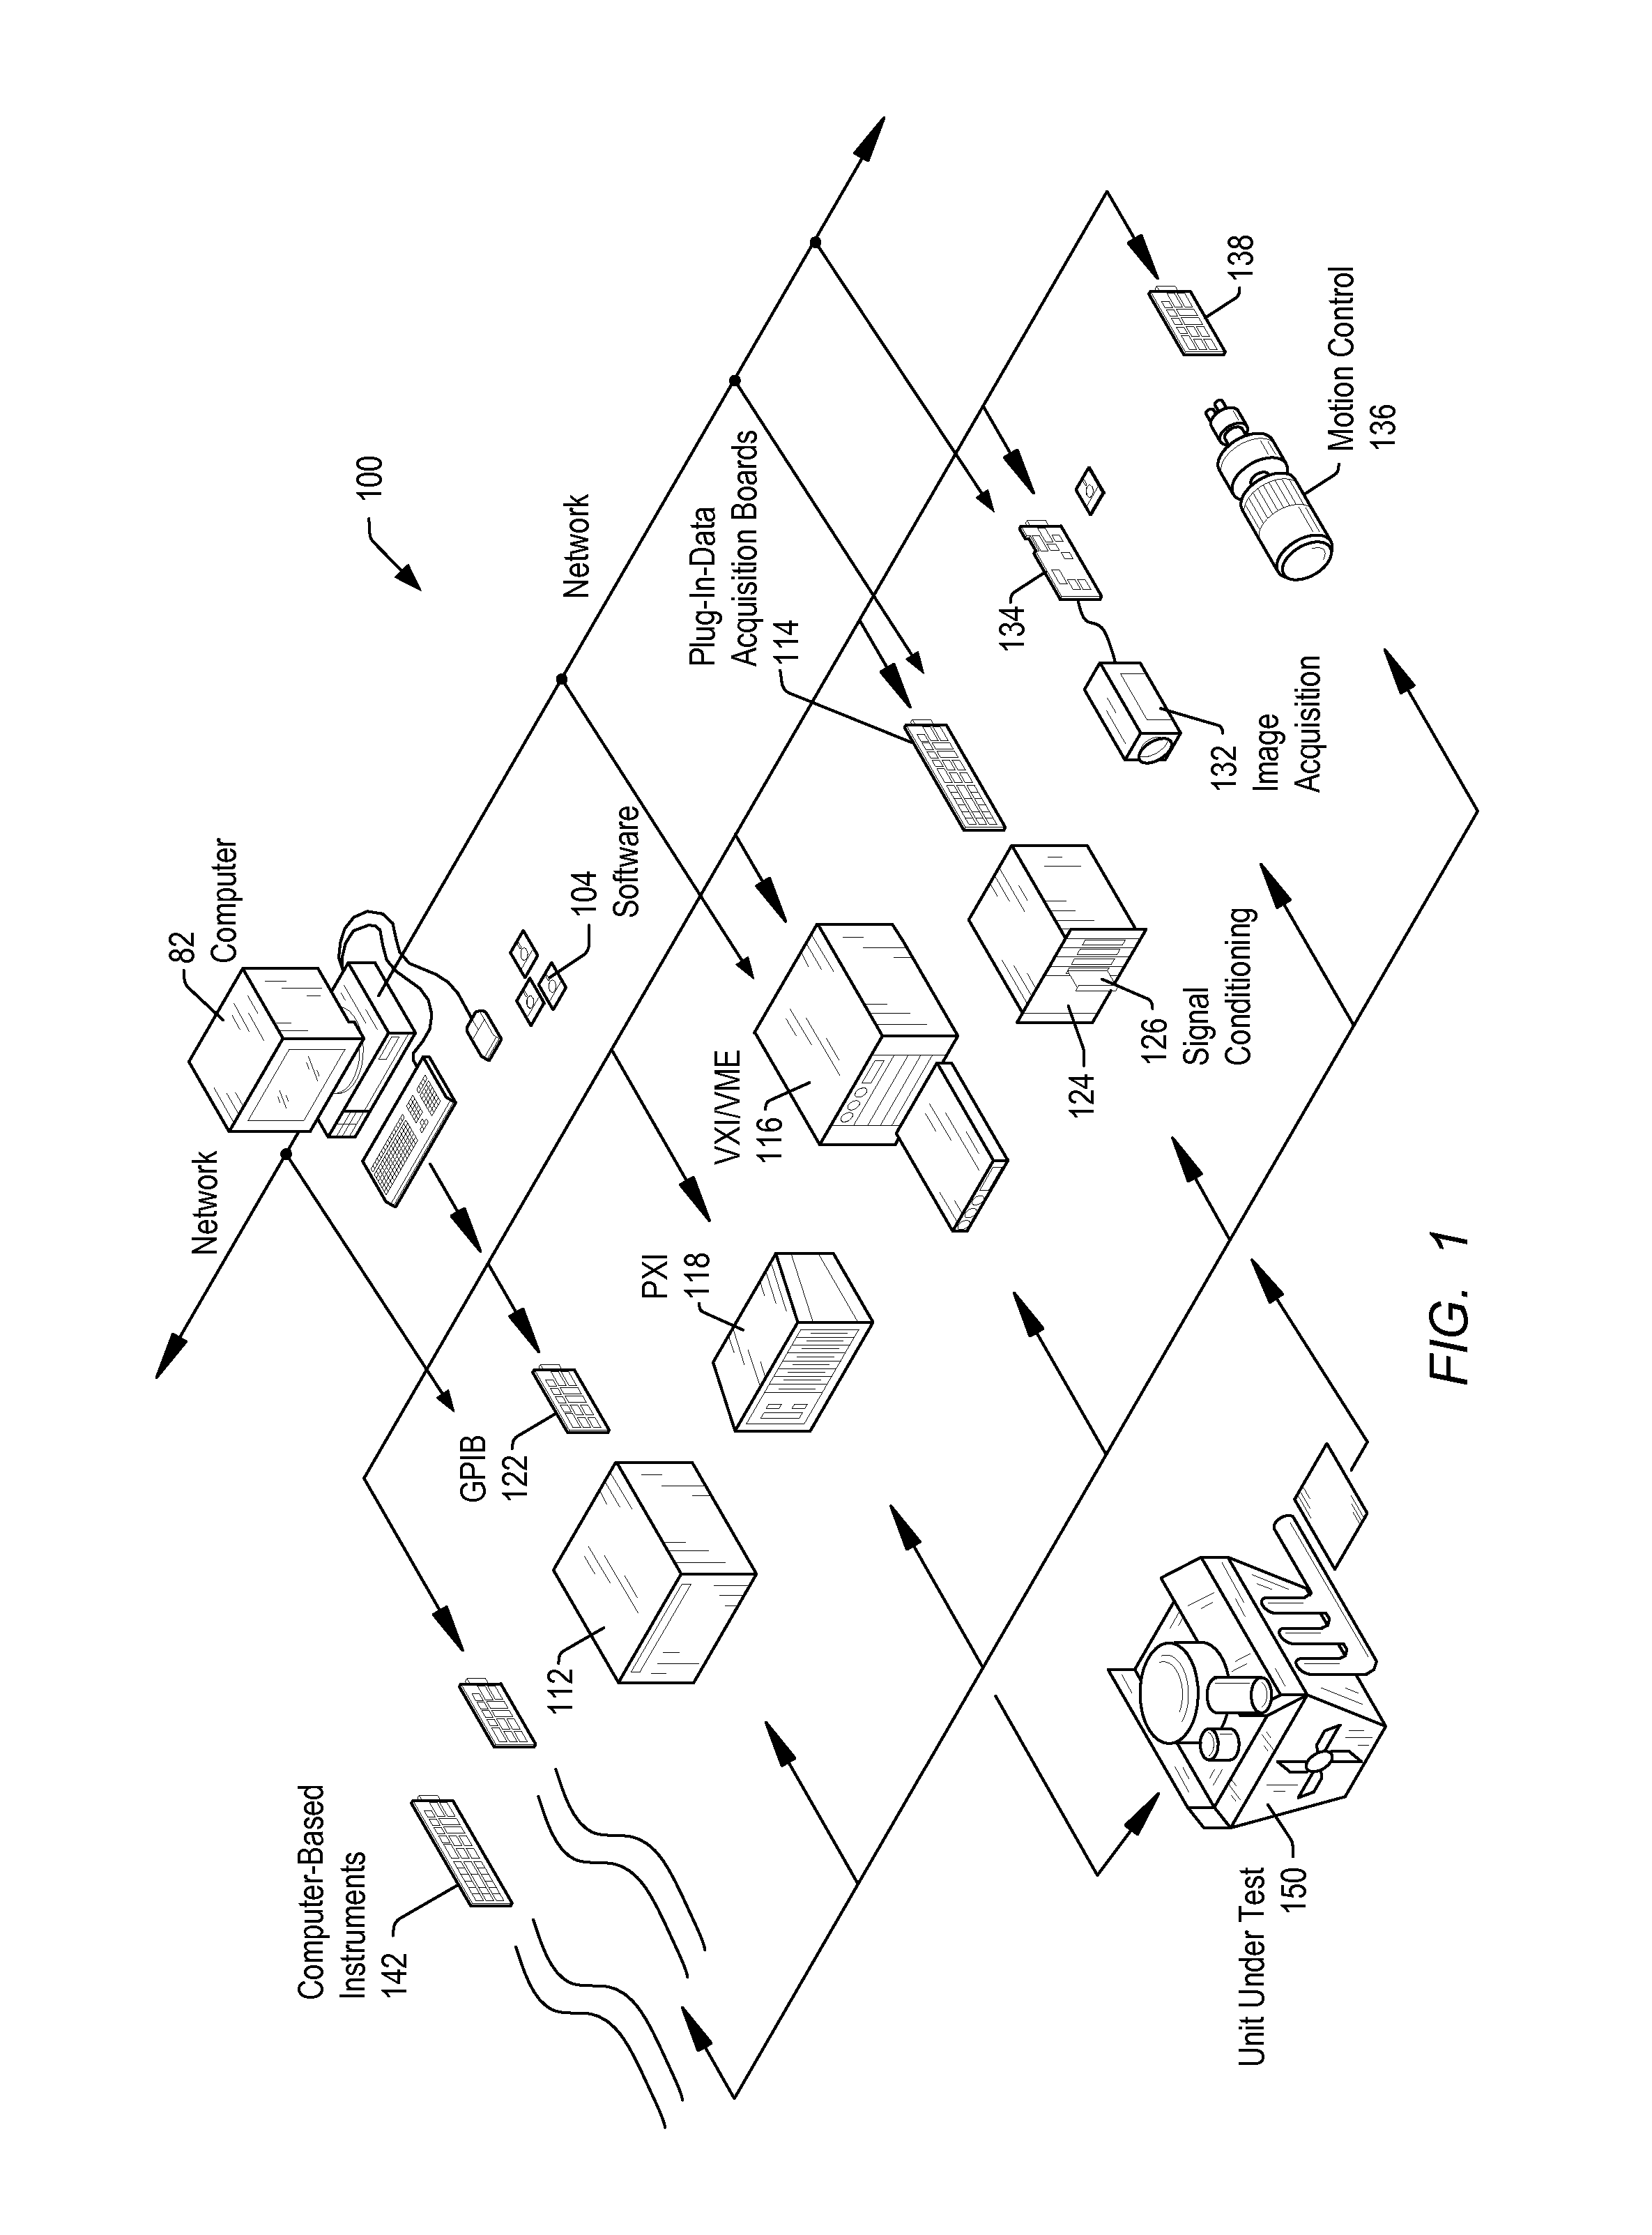 Selectively Transparent Bridge for Peripheral Component Interconnect Express Bus Systems